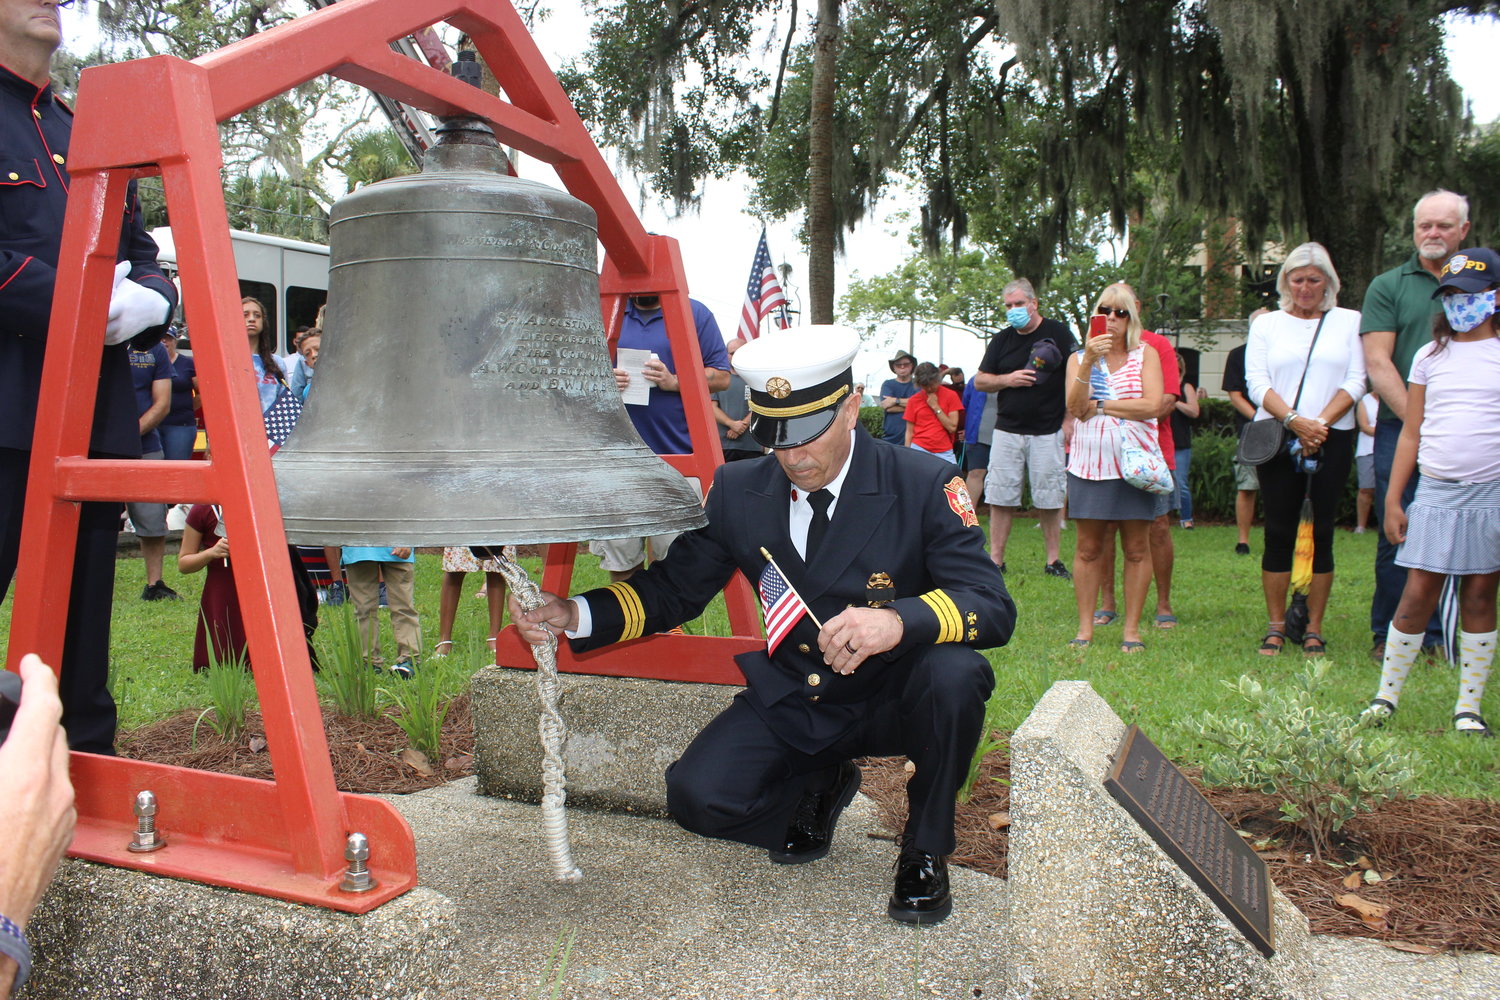 At the conclusion of the 9/11 memorial service in St. Augustine, Fire Department Safety Chief and Fire Marshal Bob Growick rings the historic 1900 service fire bell at four intervals of five rings each.  The tradition of 